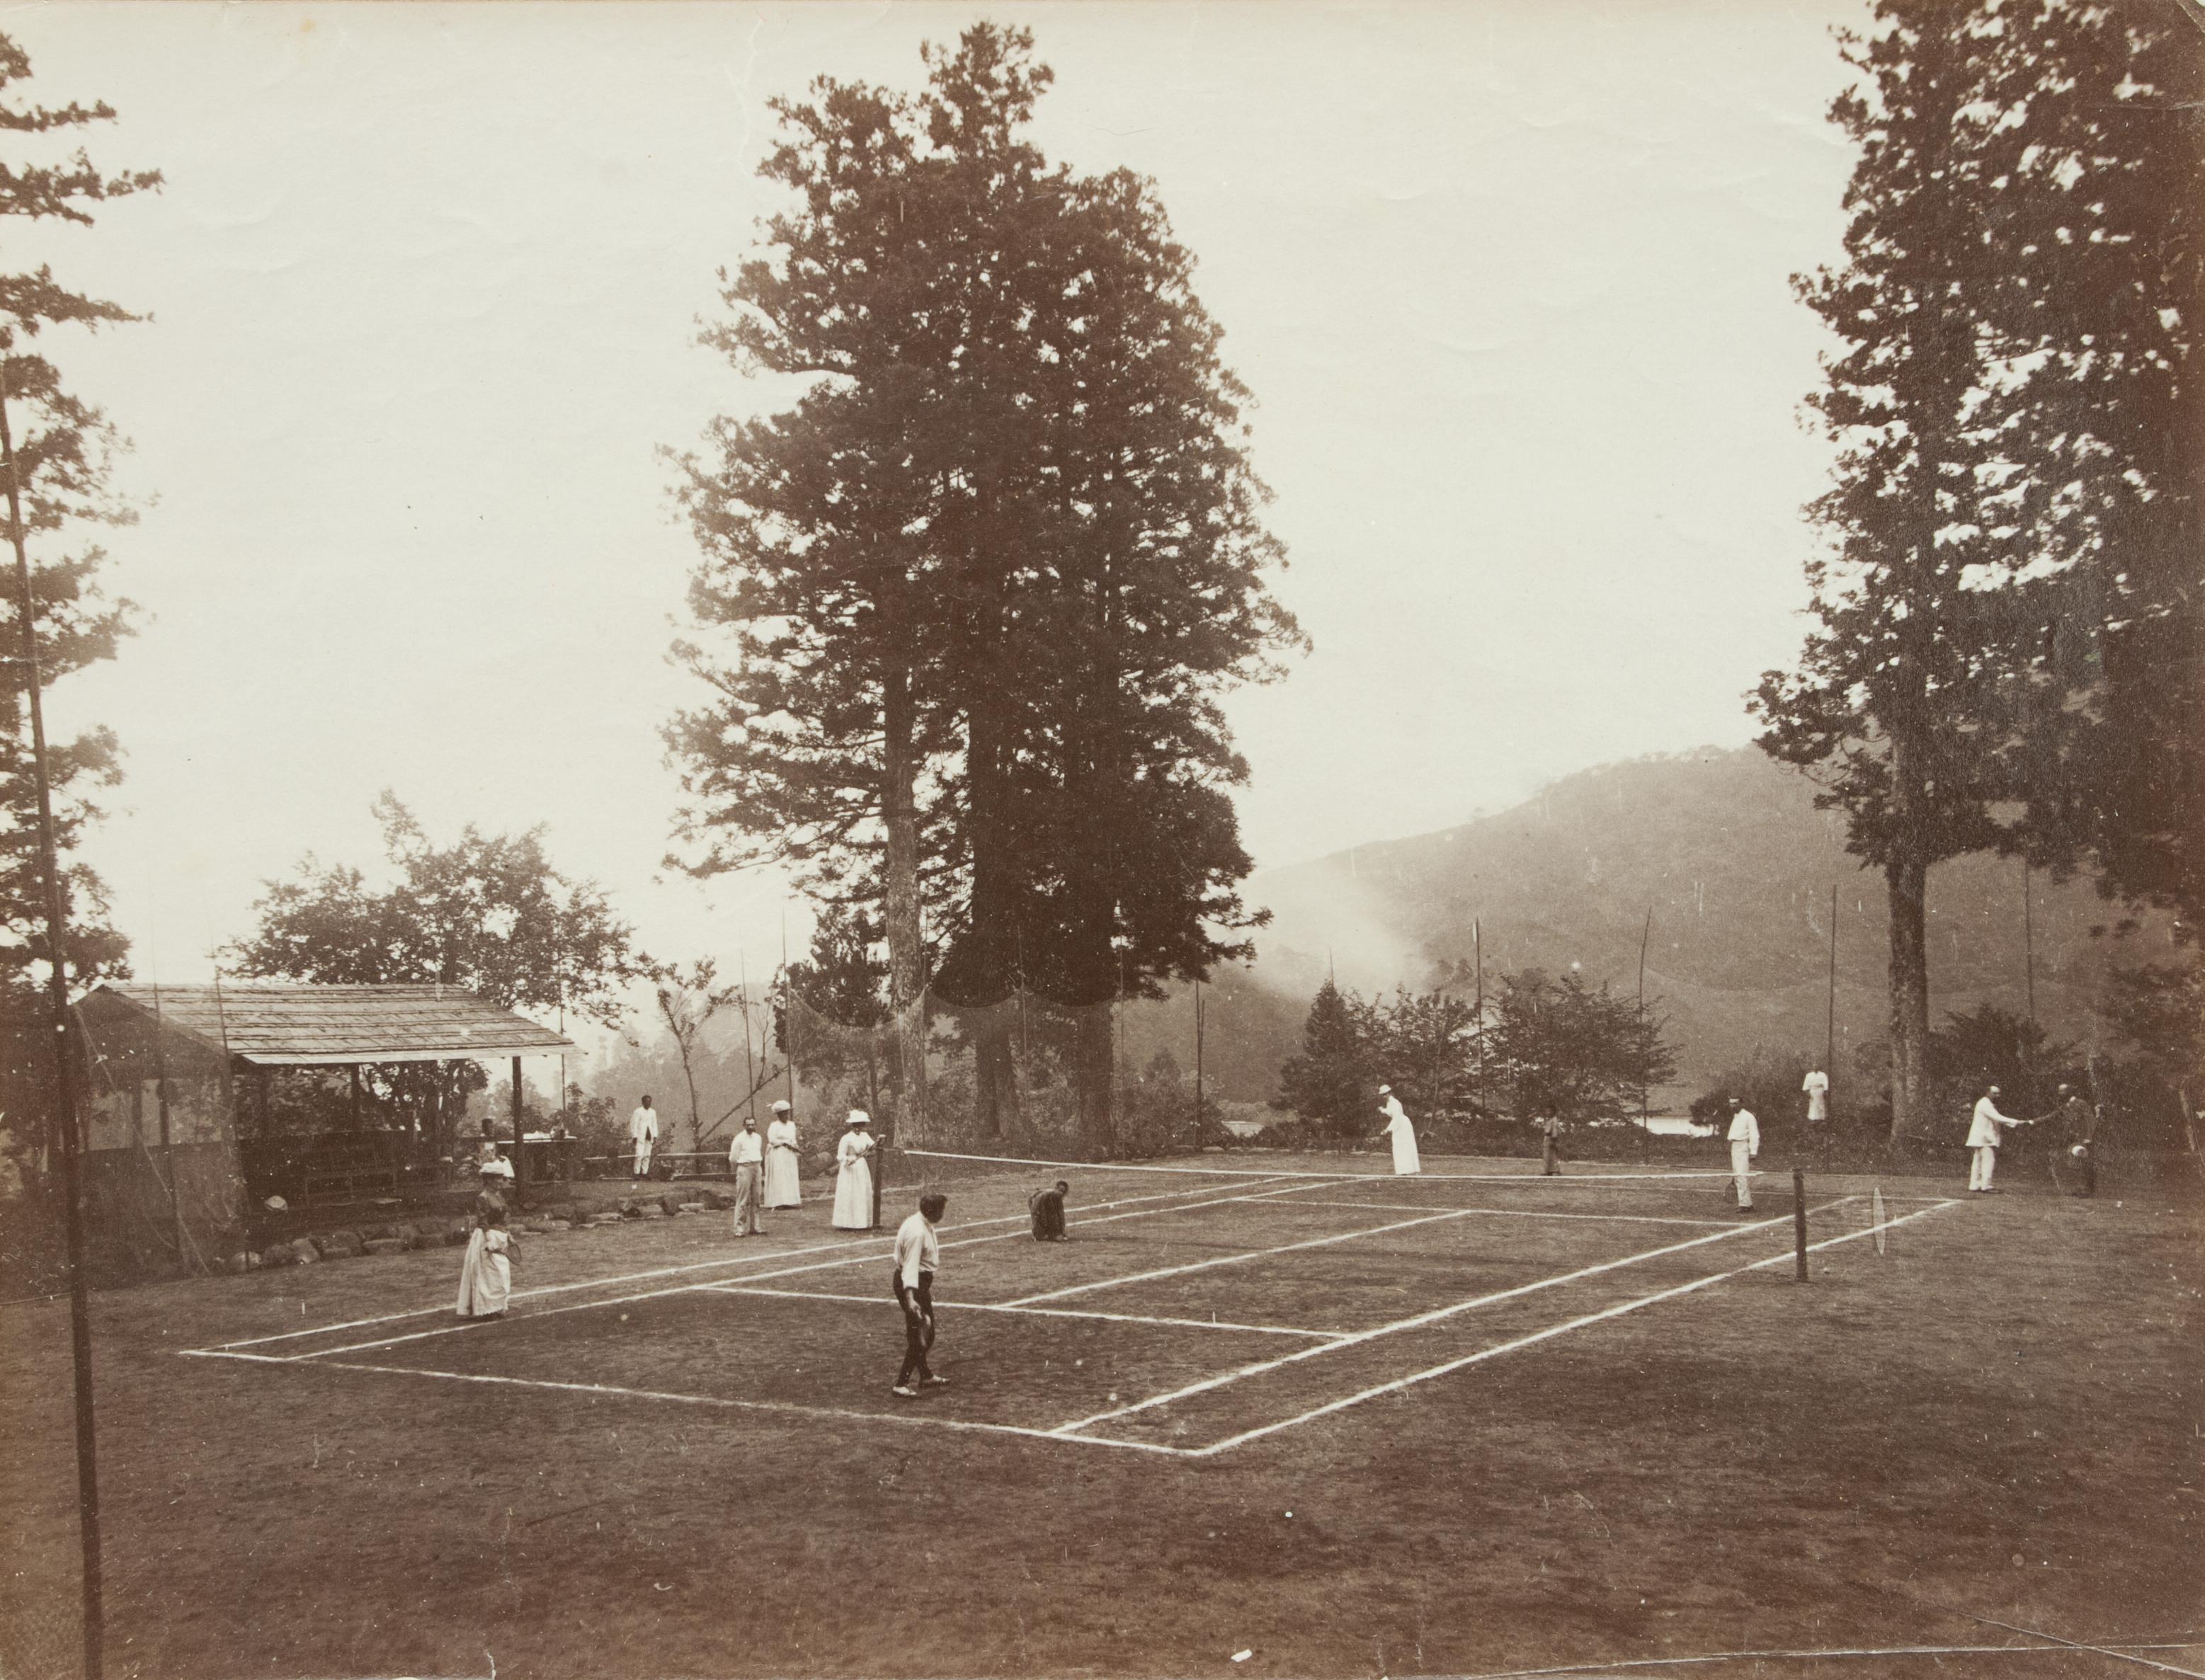 British Colonial Tennis Photograph. This black and white photograph captures the essence of British Colonial life in the late 19th century. The loose albumen print shows a game of mixed doubles in progress. There is a catch net all the way around